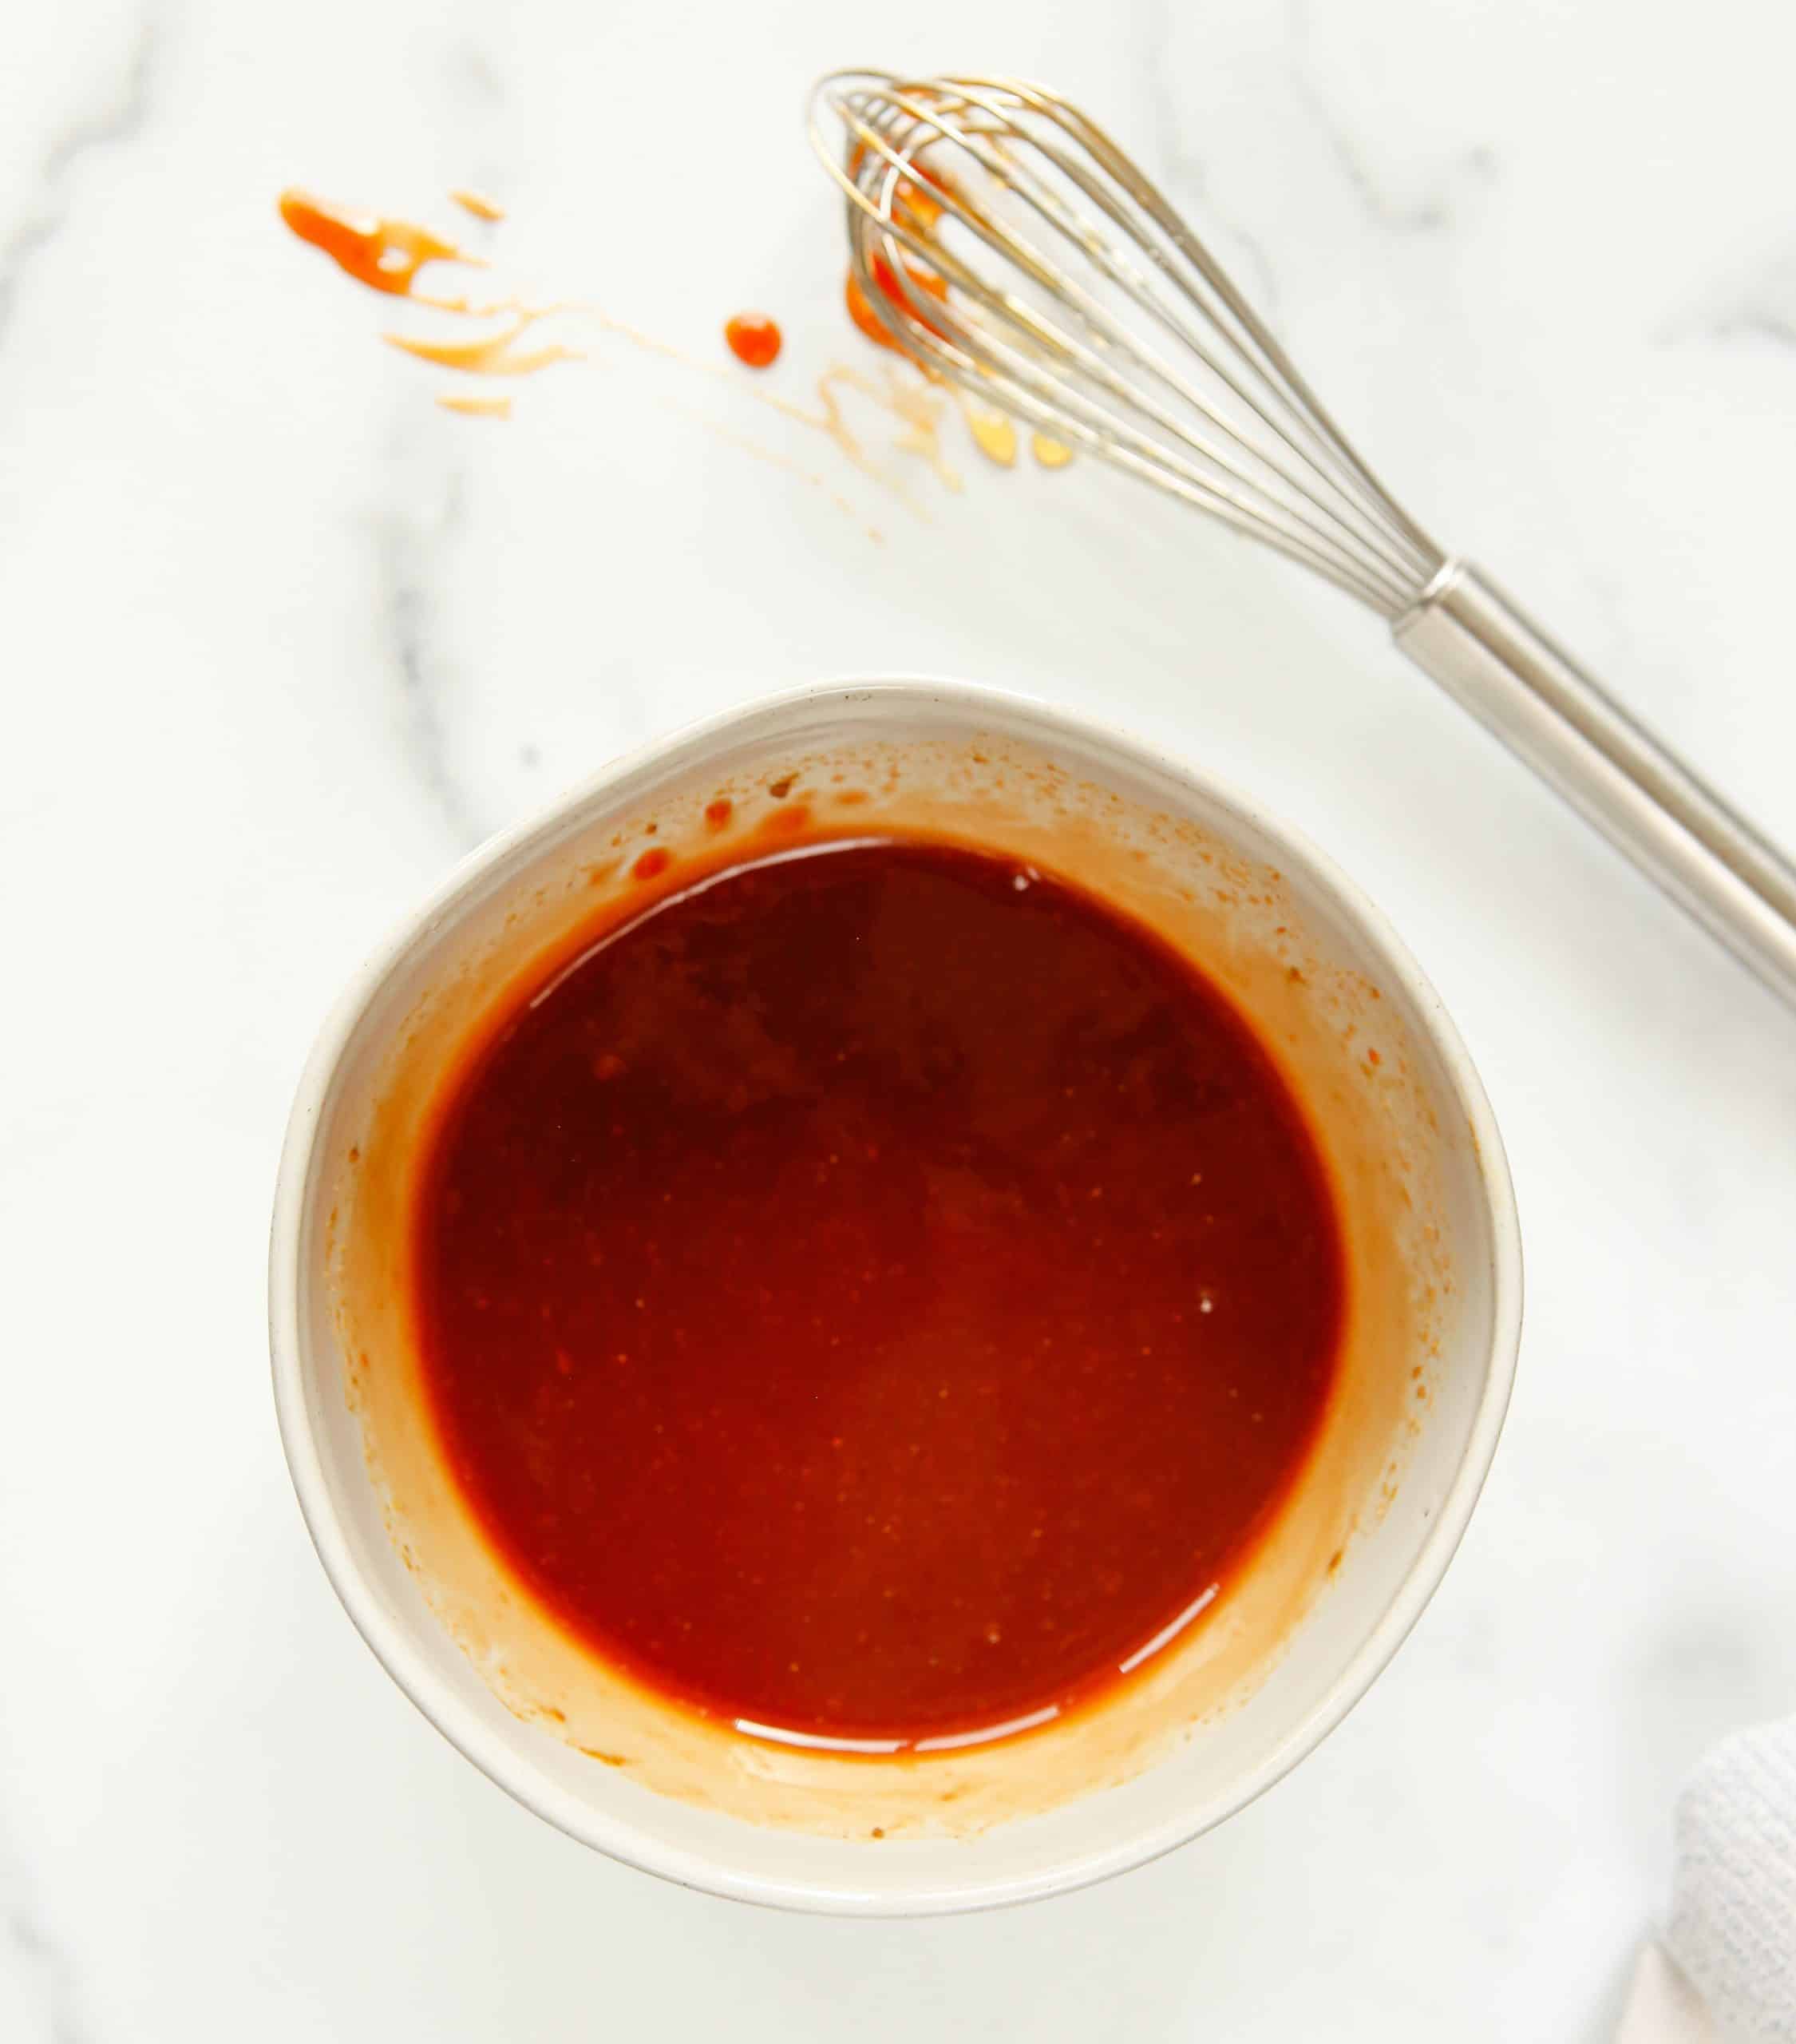 sweet and sour sauce whisked in a small white bowl.